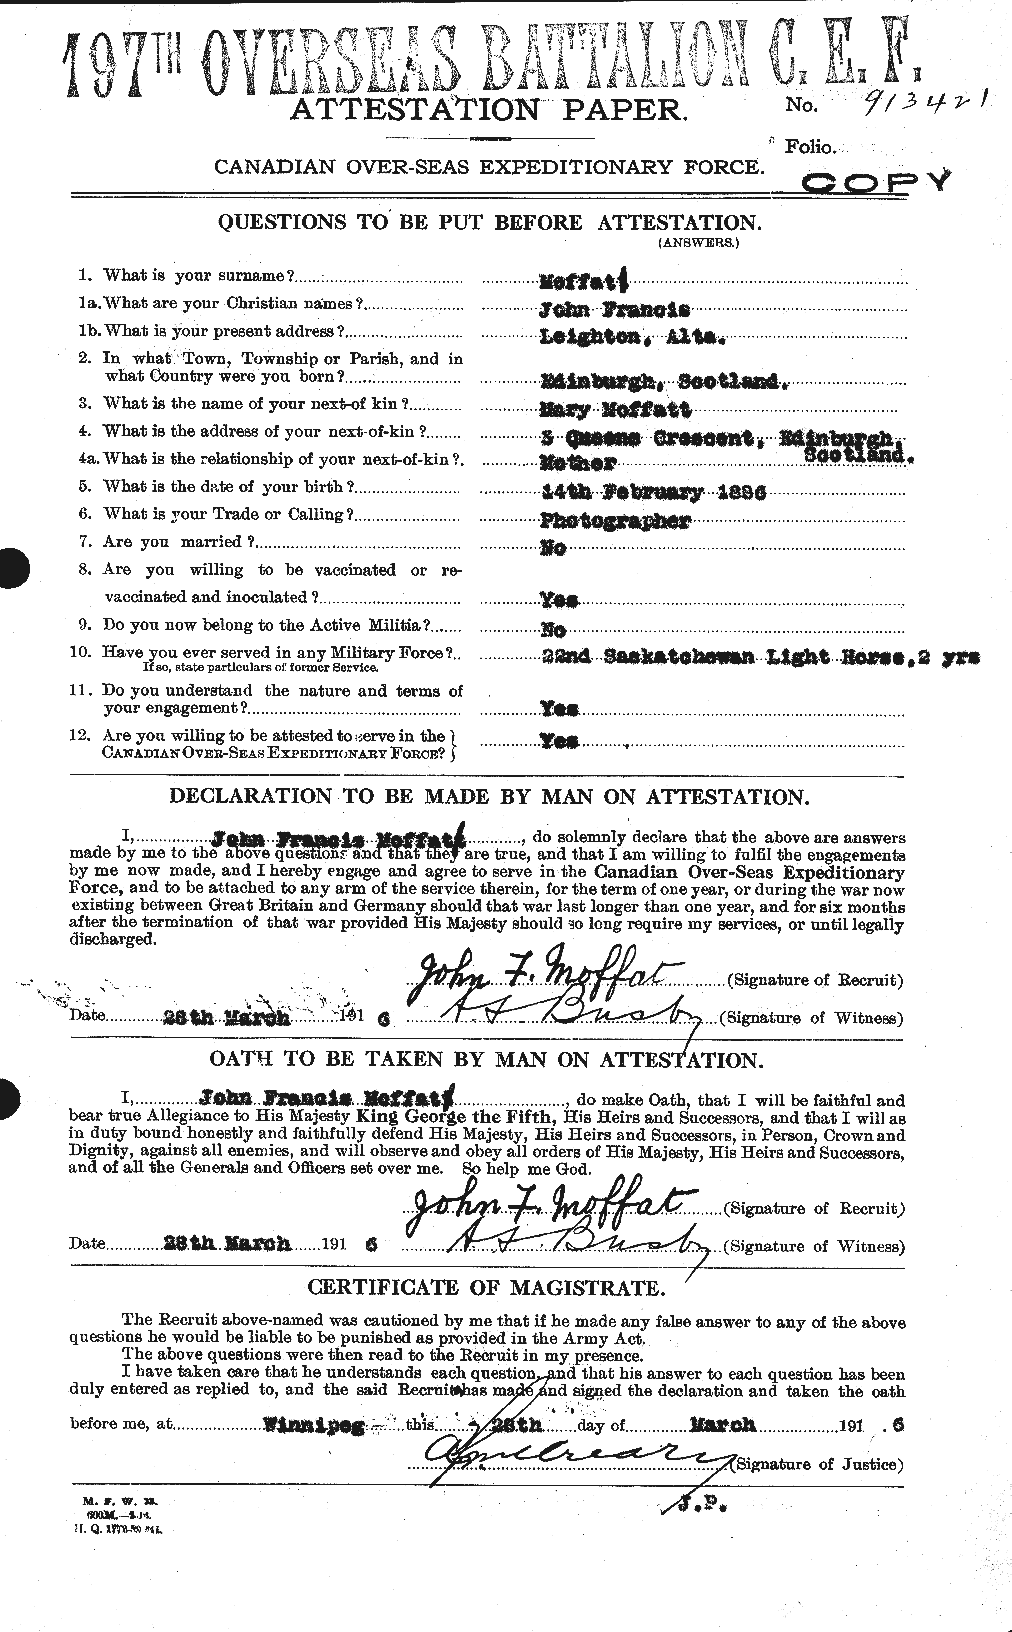 Personnel Records of the First World War - CEF 499048a